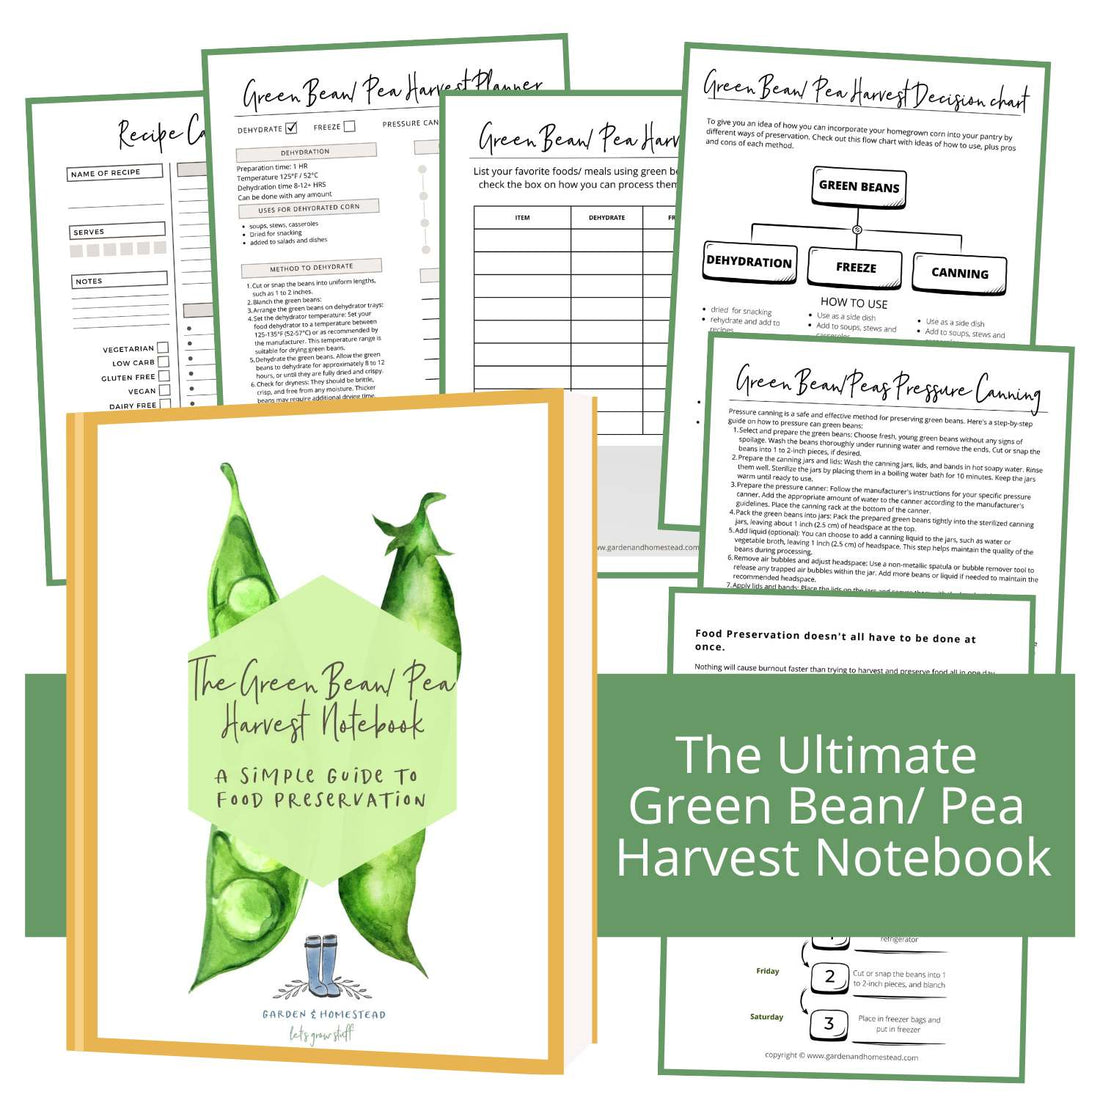 The Green Bean / Pea Harvest Notebook